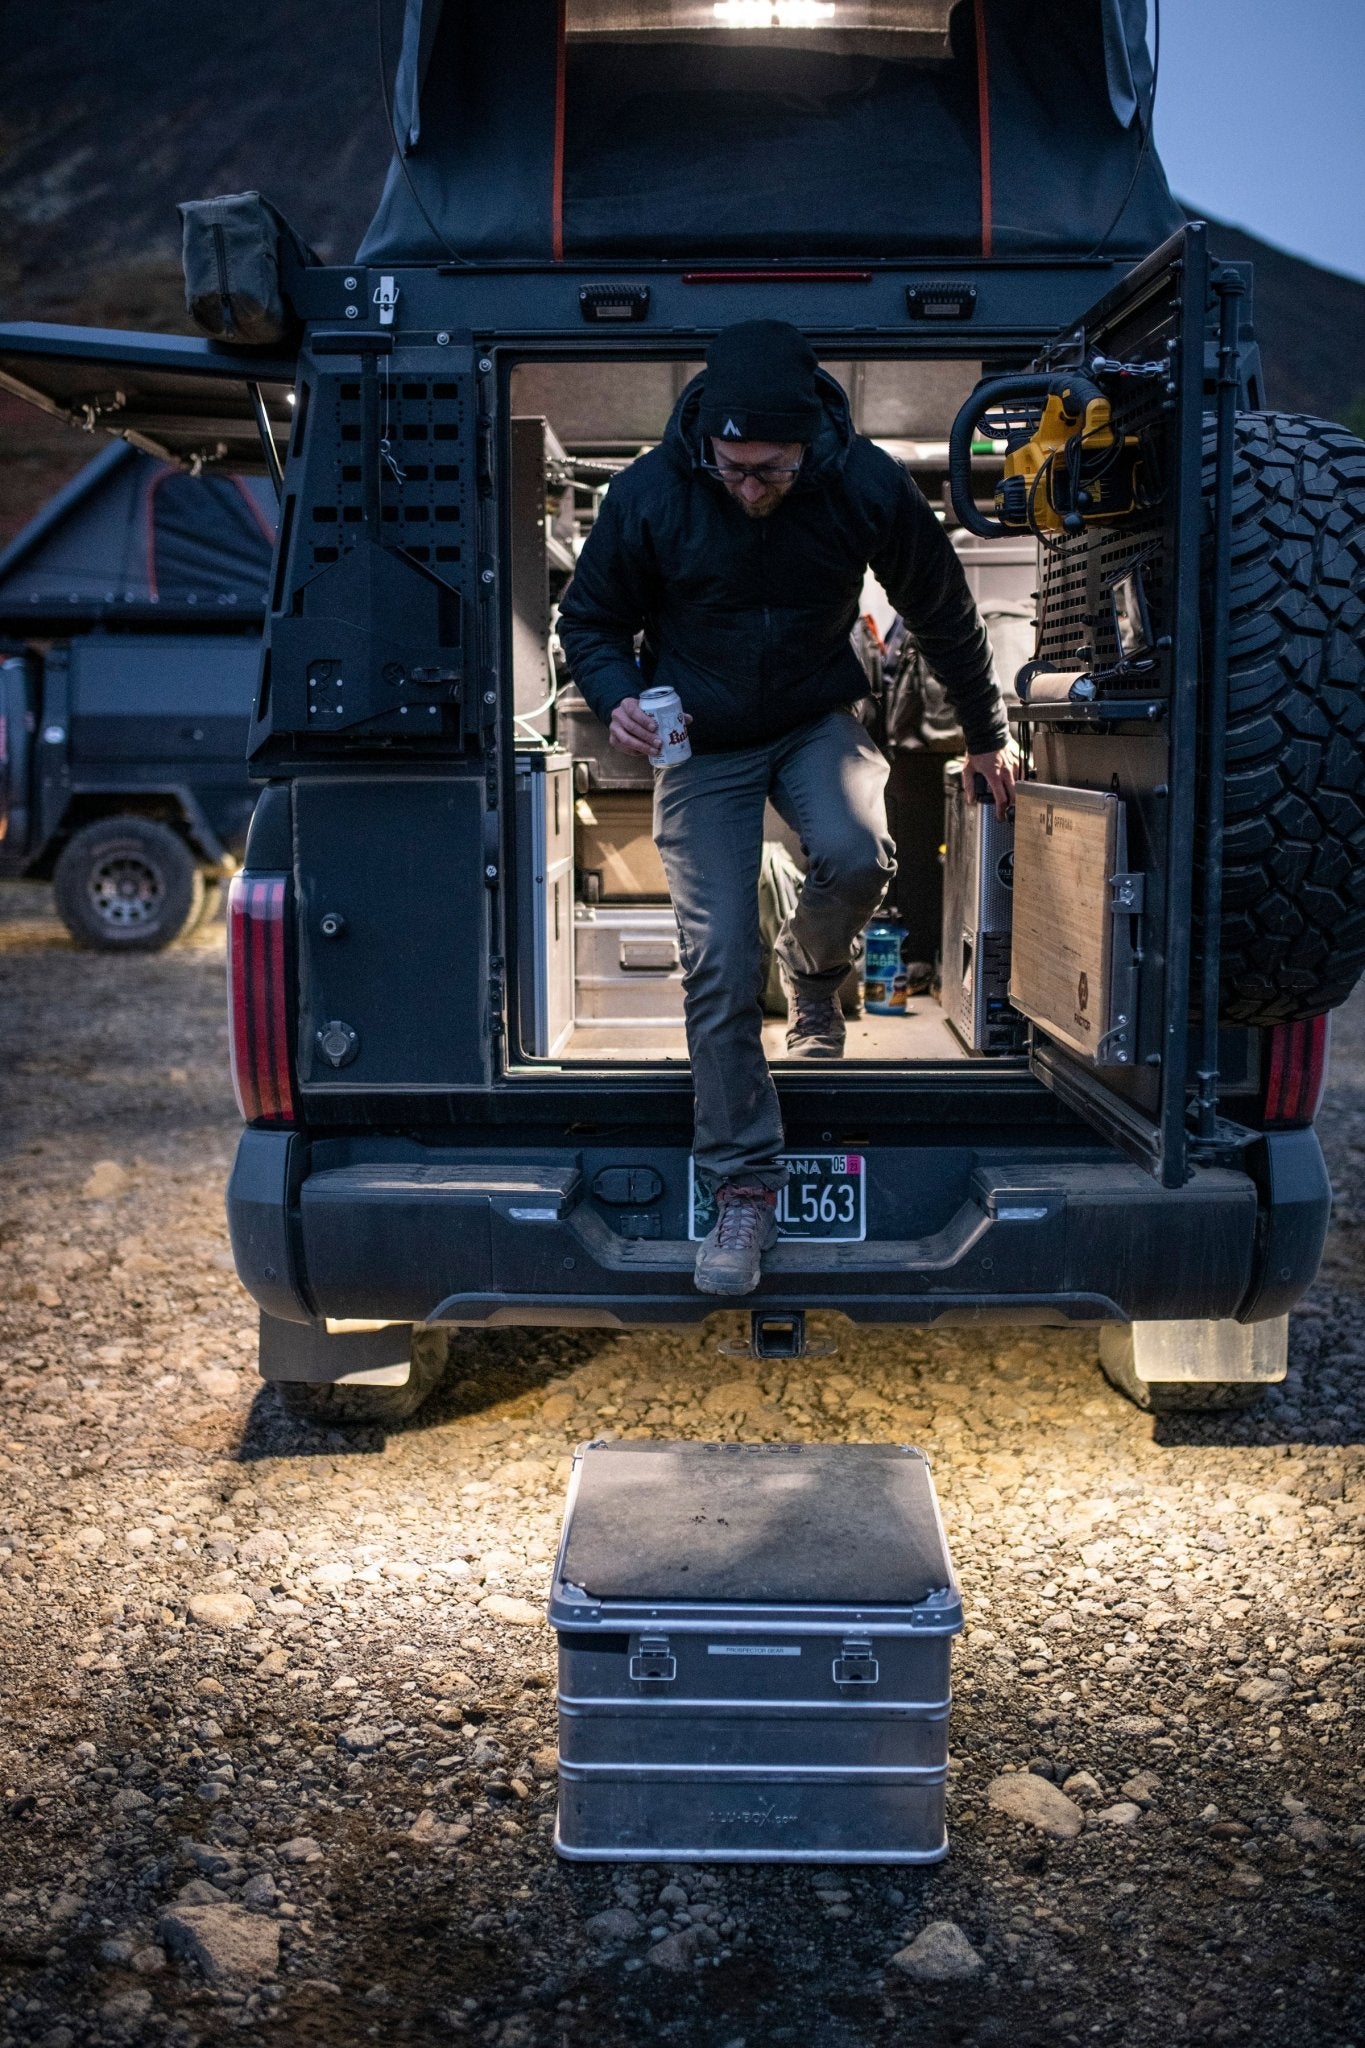 Alubox Transport Case S74 — Offroad and More